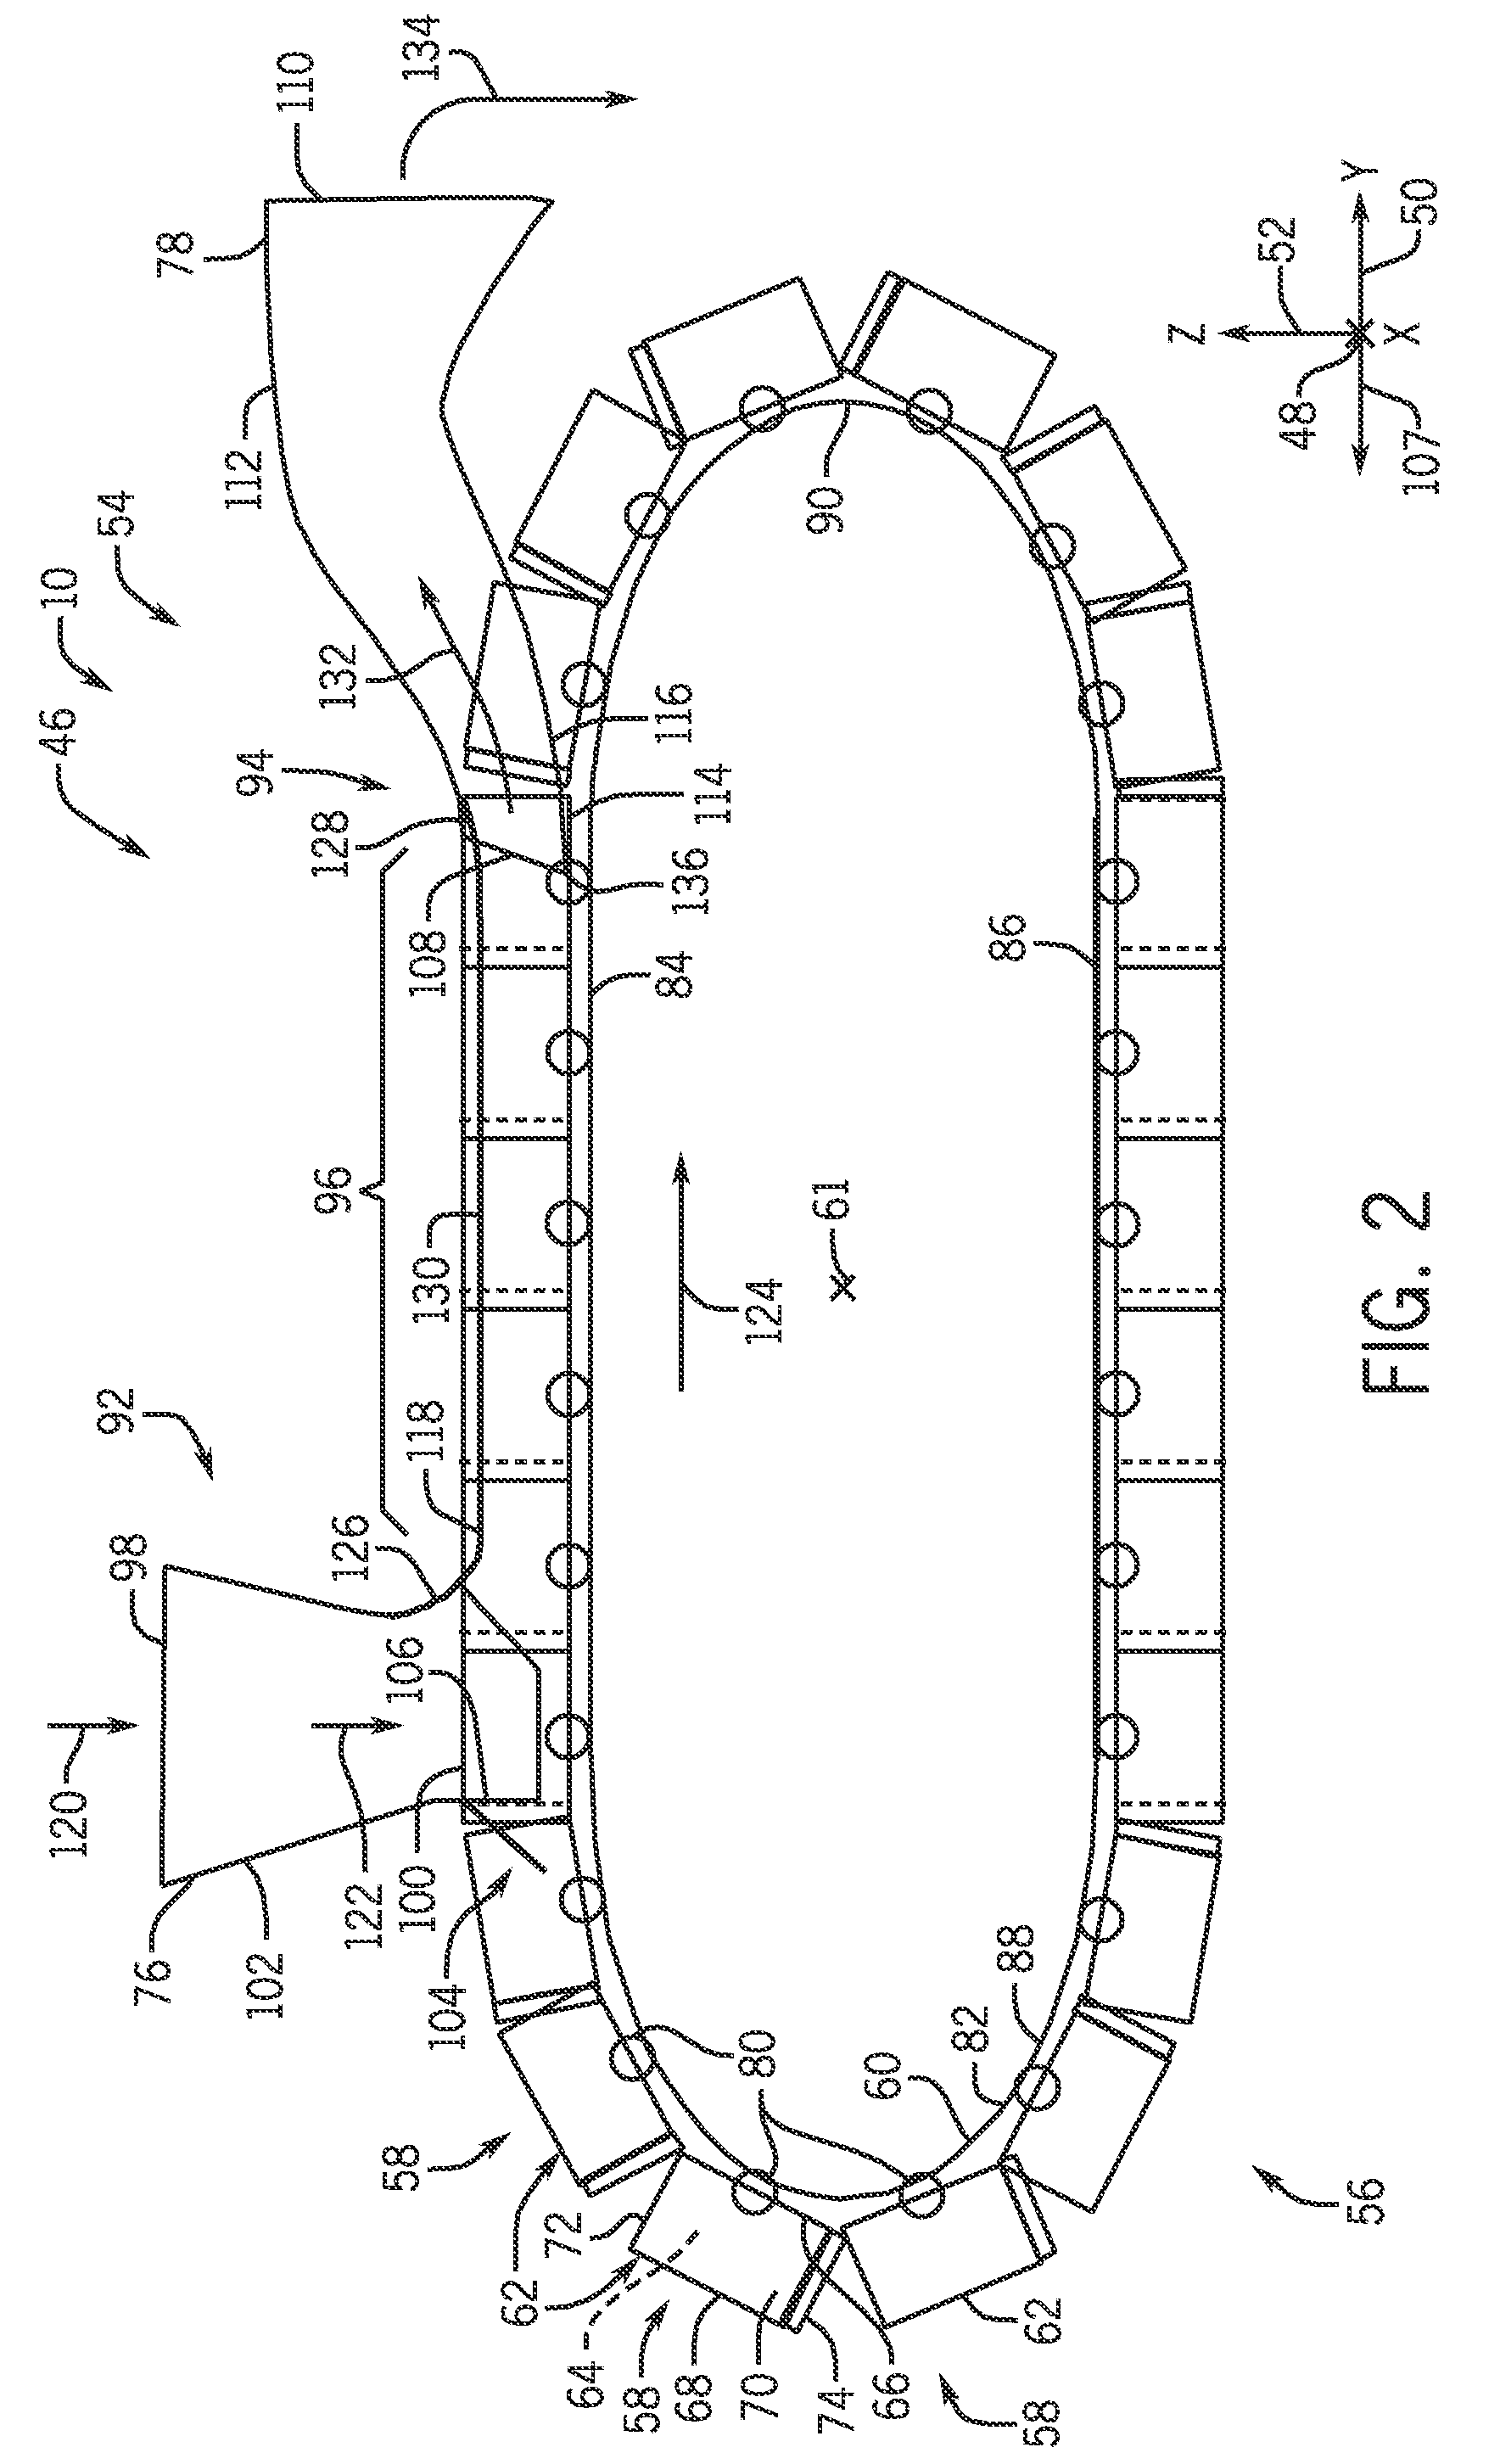 System and method for transporting solid feed in a solid feed pump